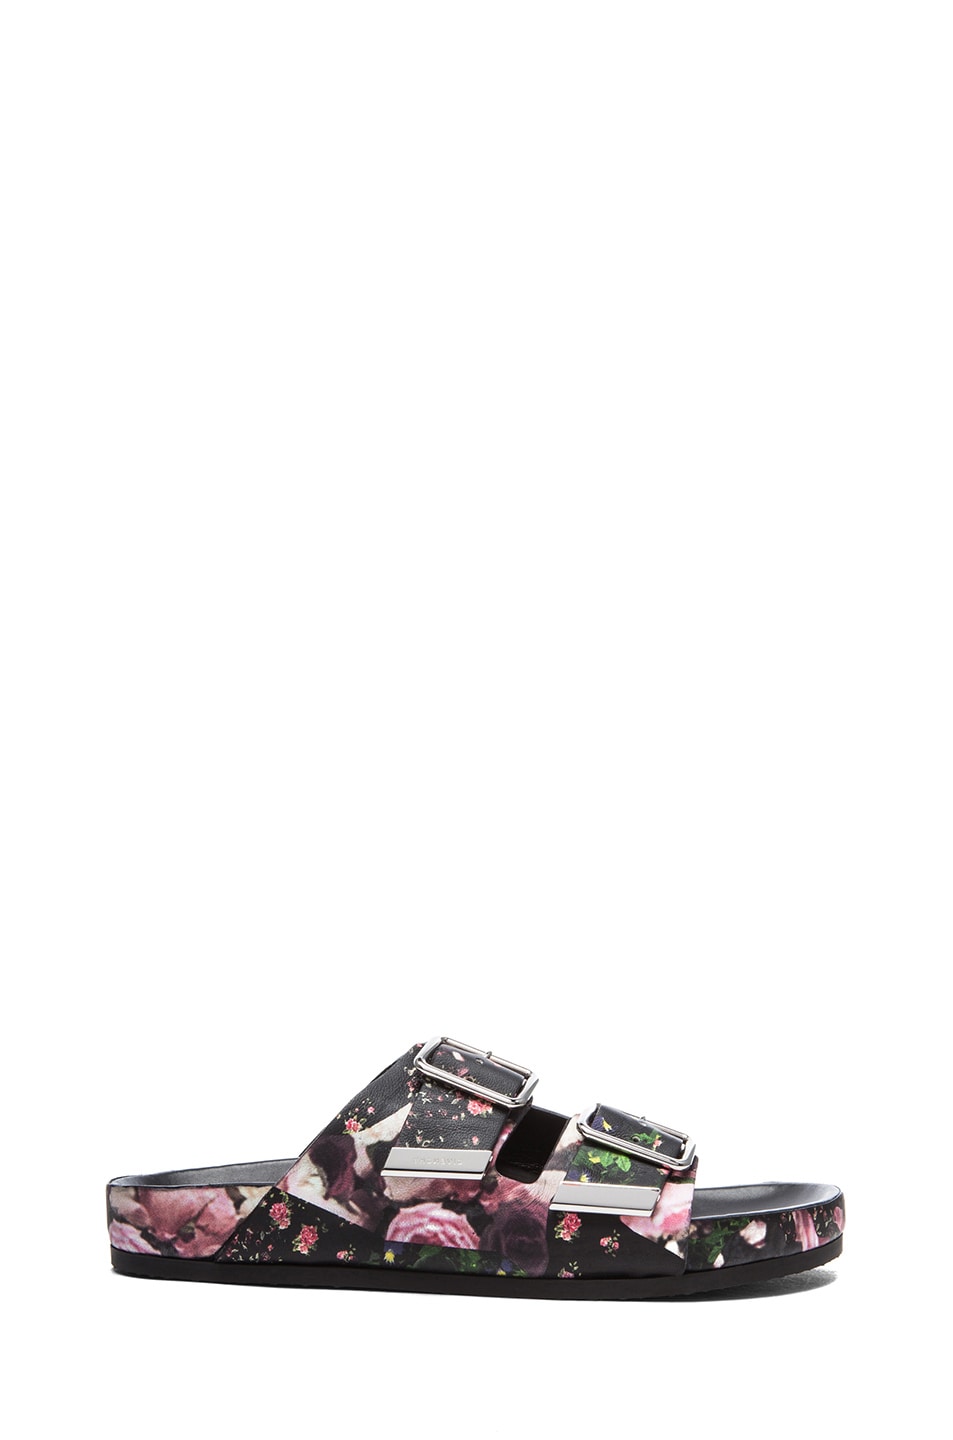 Givenchy Nappa Casual Sandals in Multi | FWRD